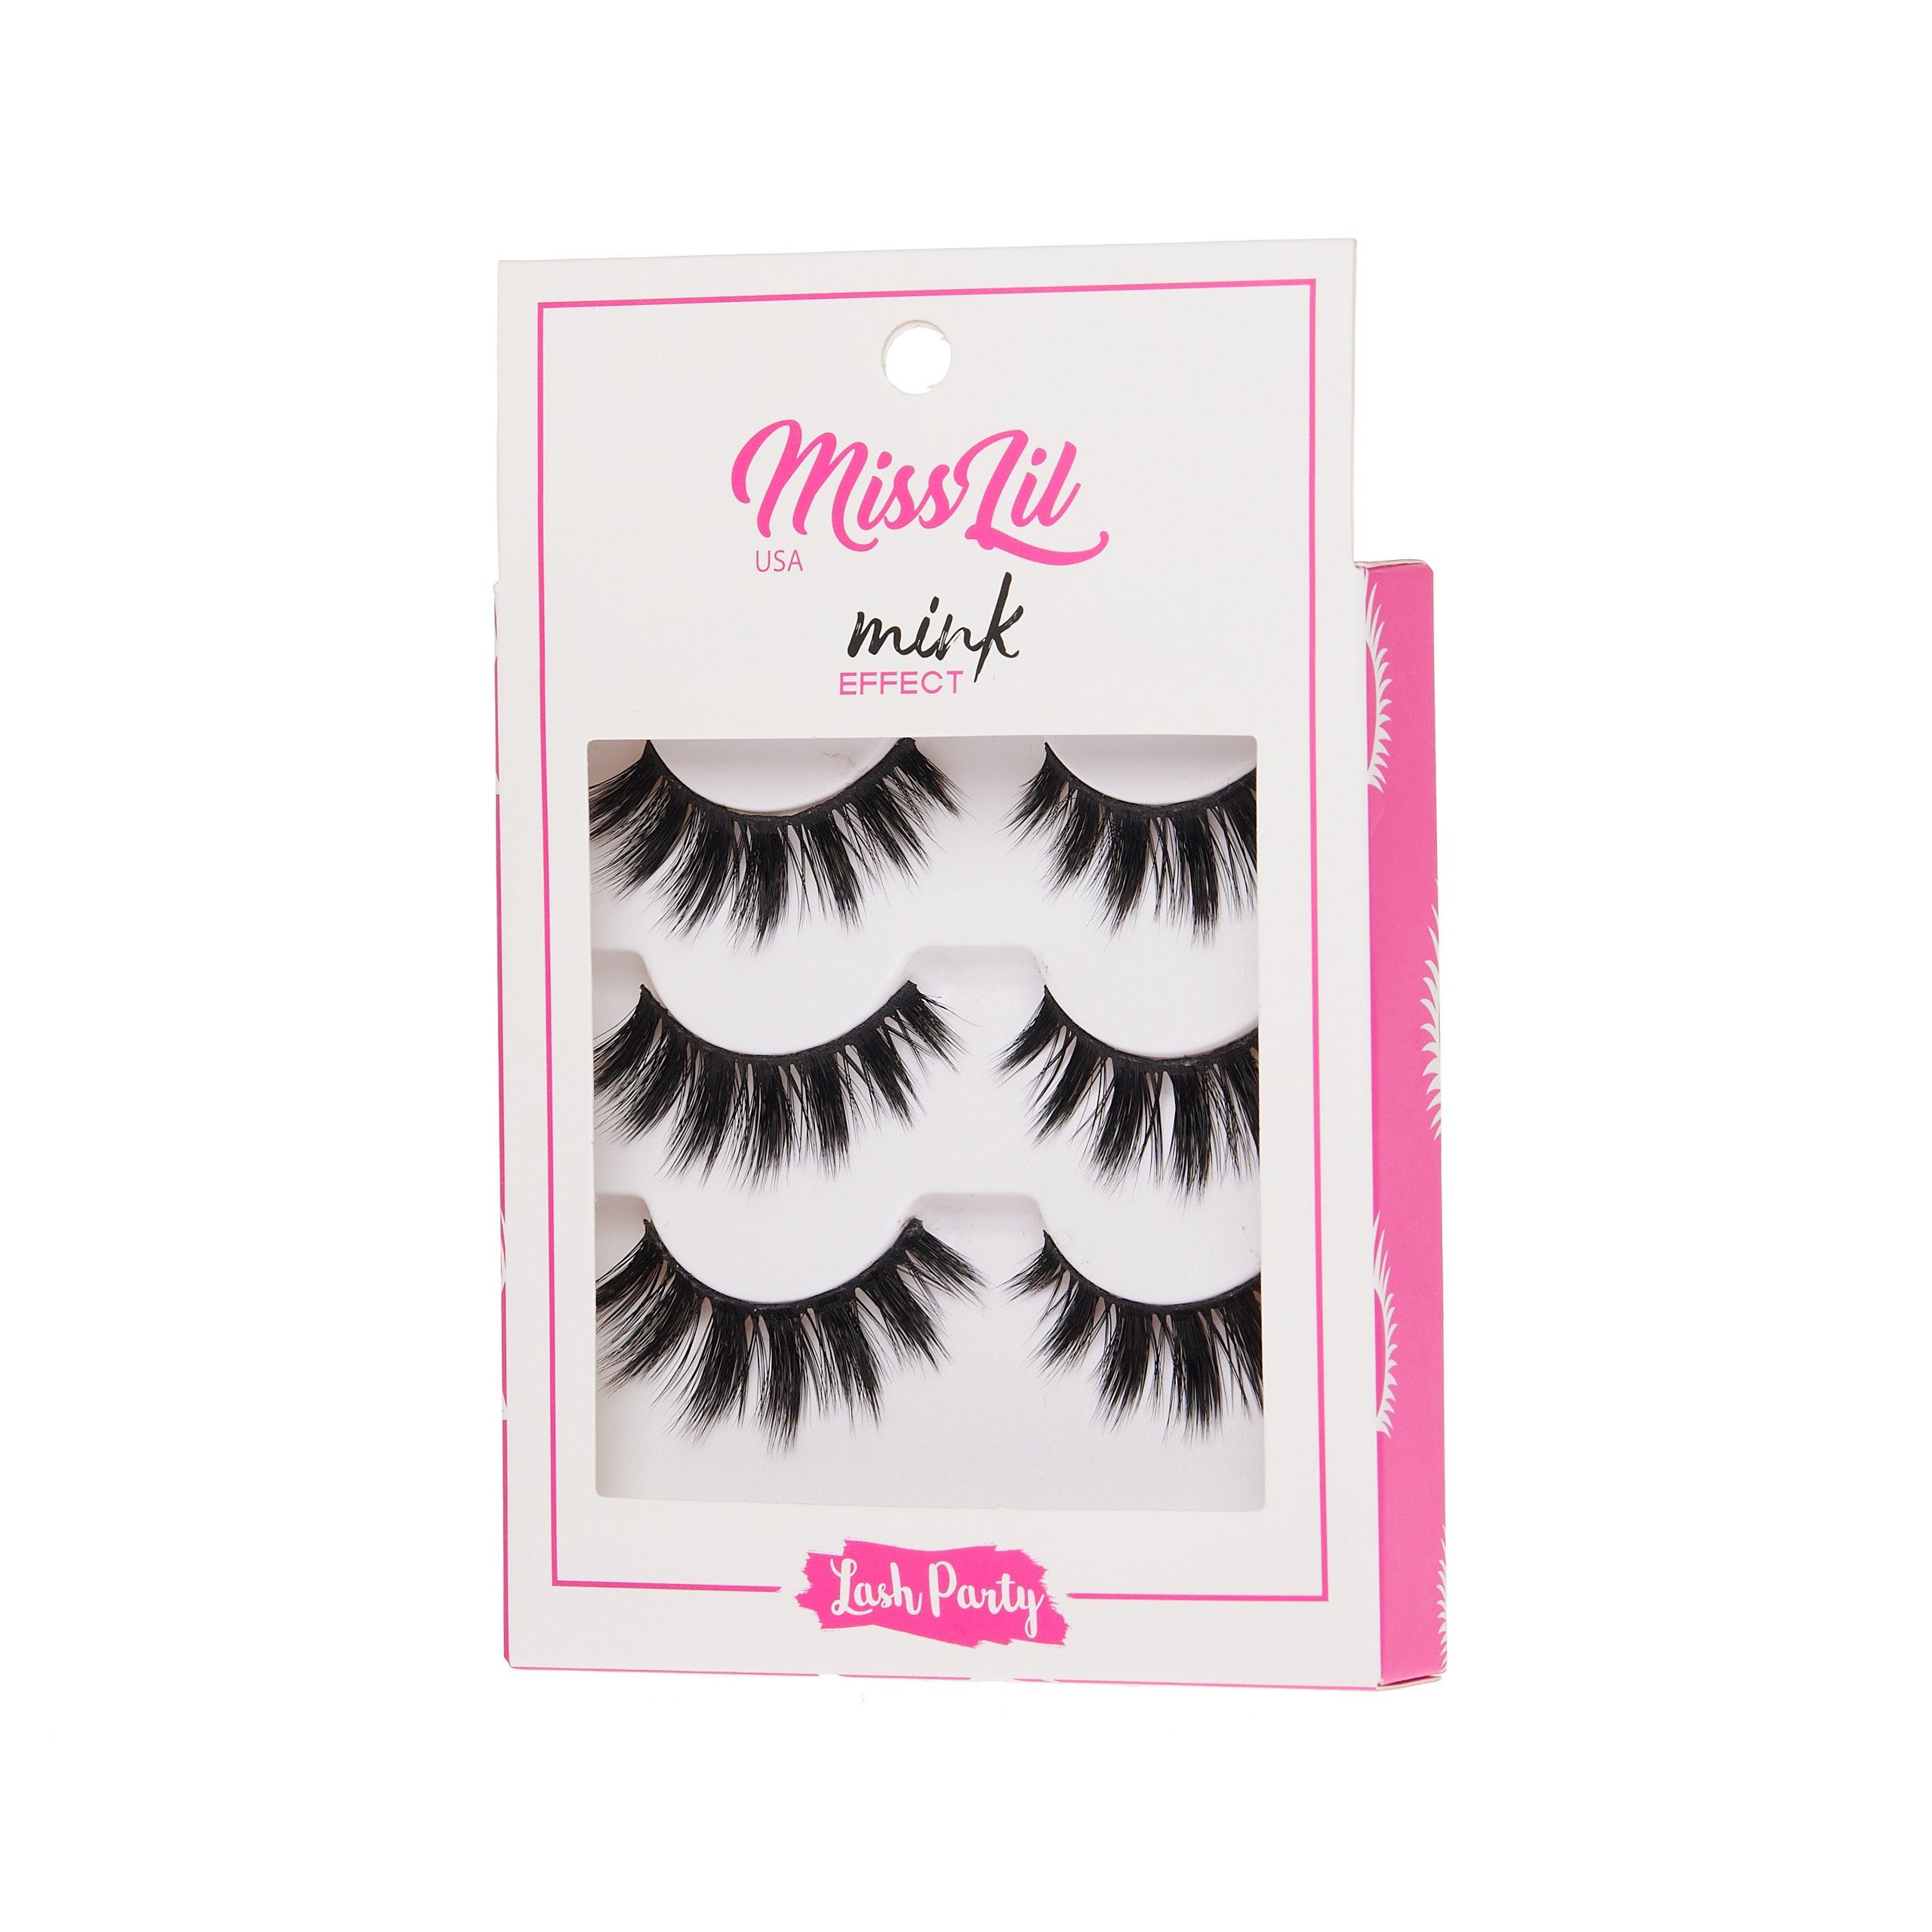 3-Pair Faux Mink Effect Eyelashes - Lash Party Collection #19 - Pack of 3 - Miss Lil USA